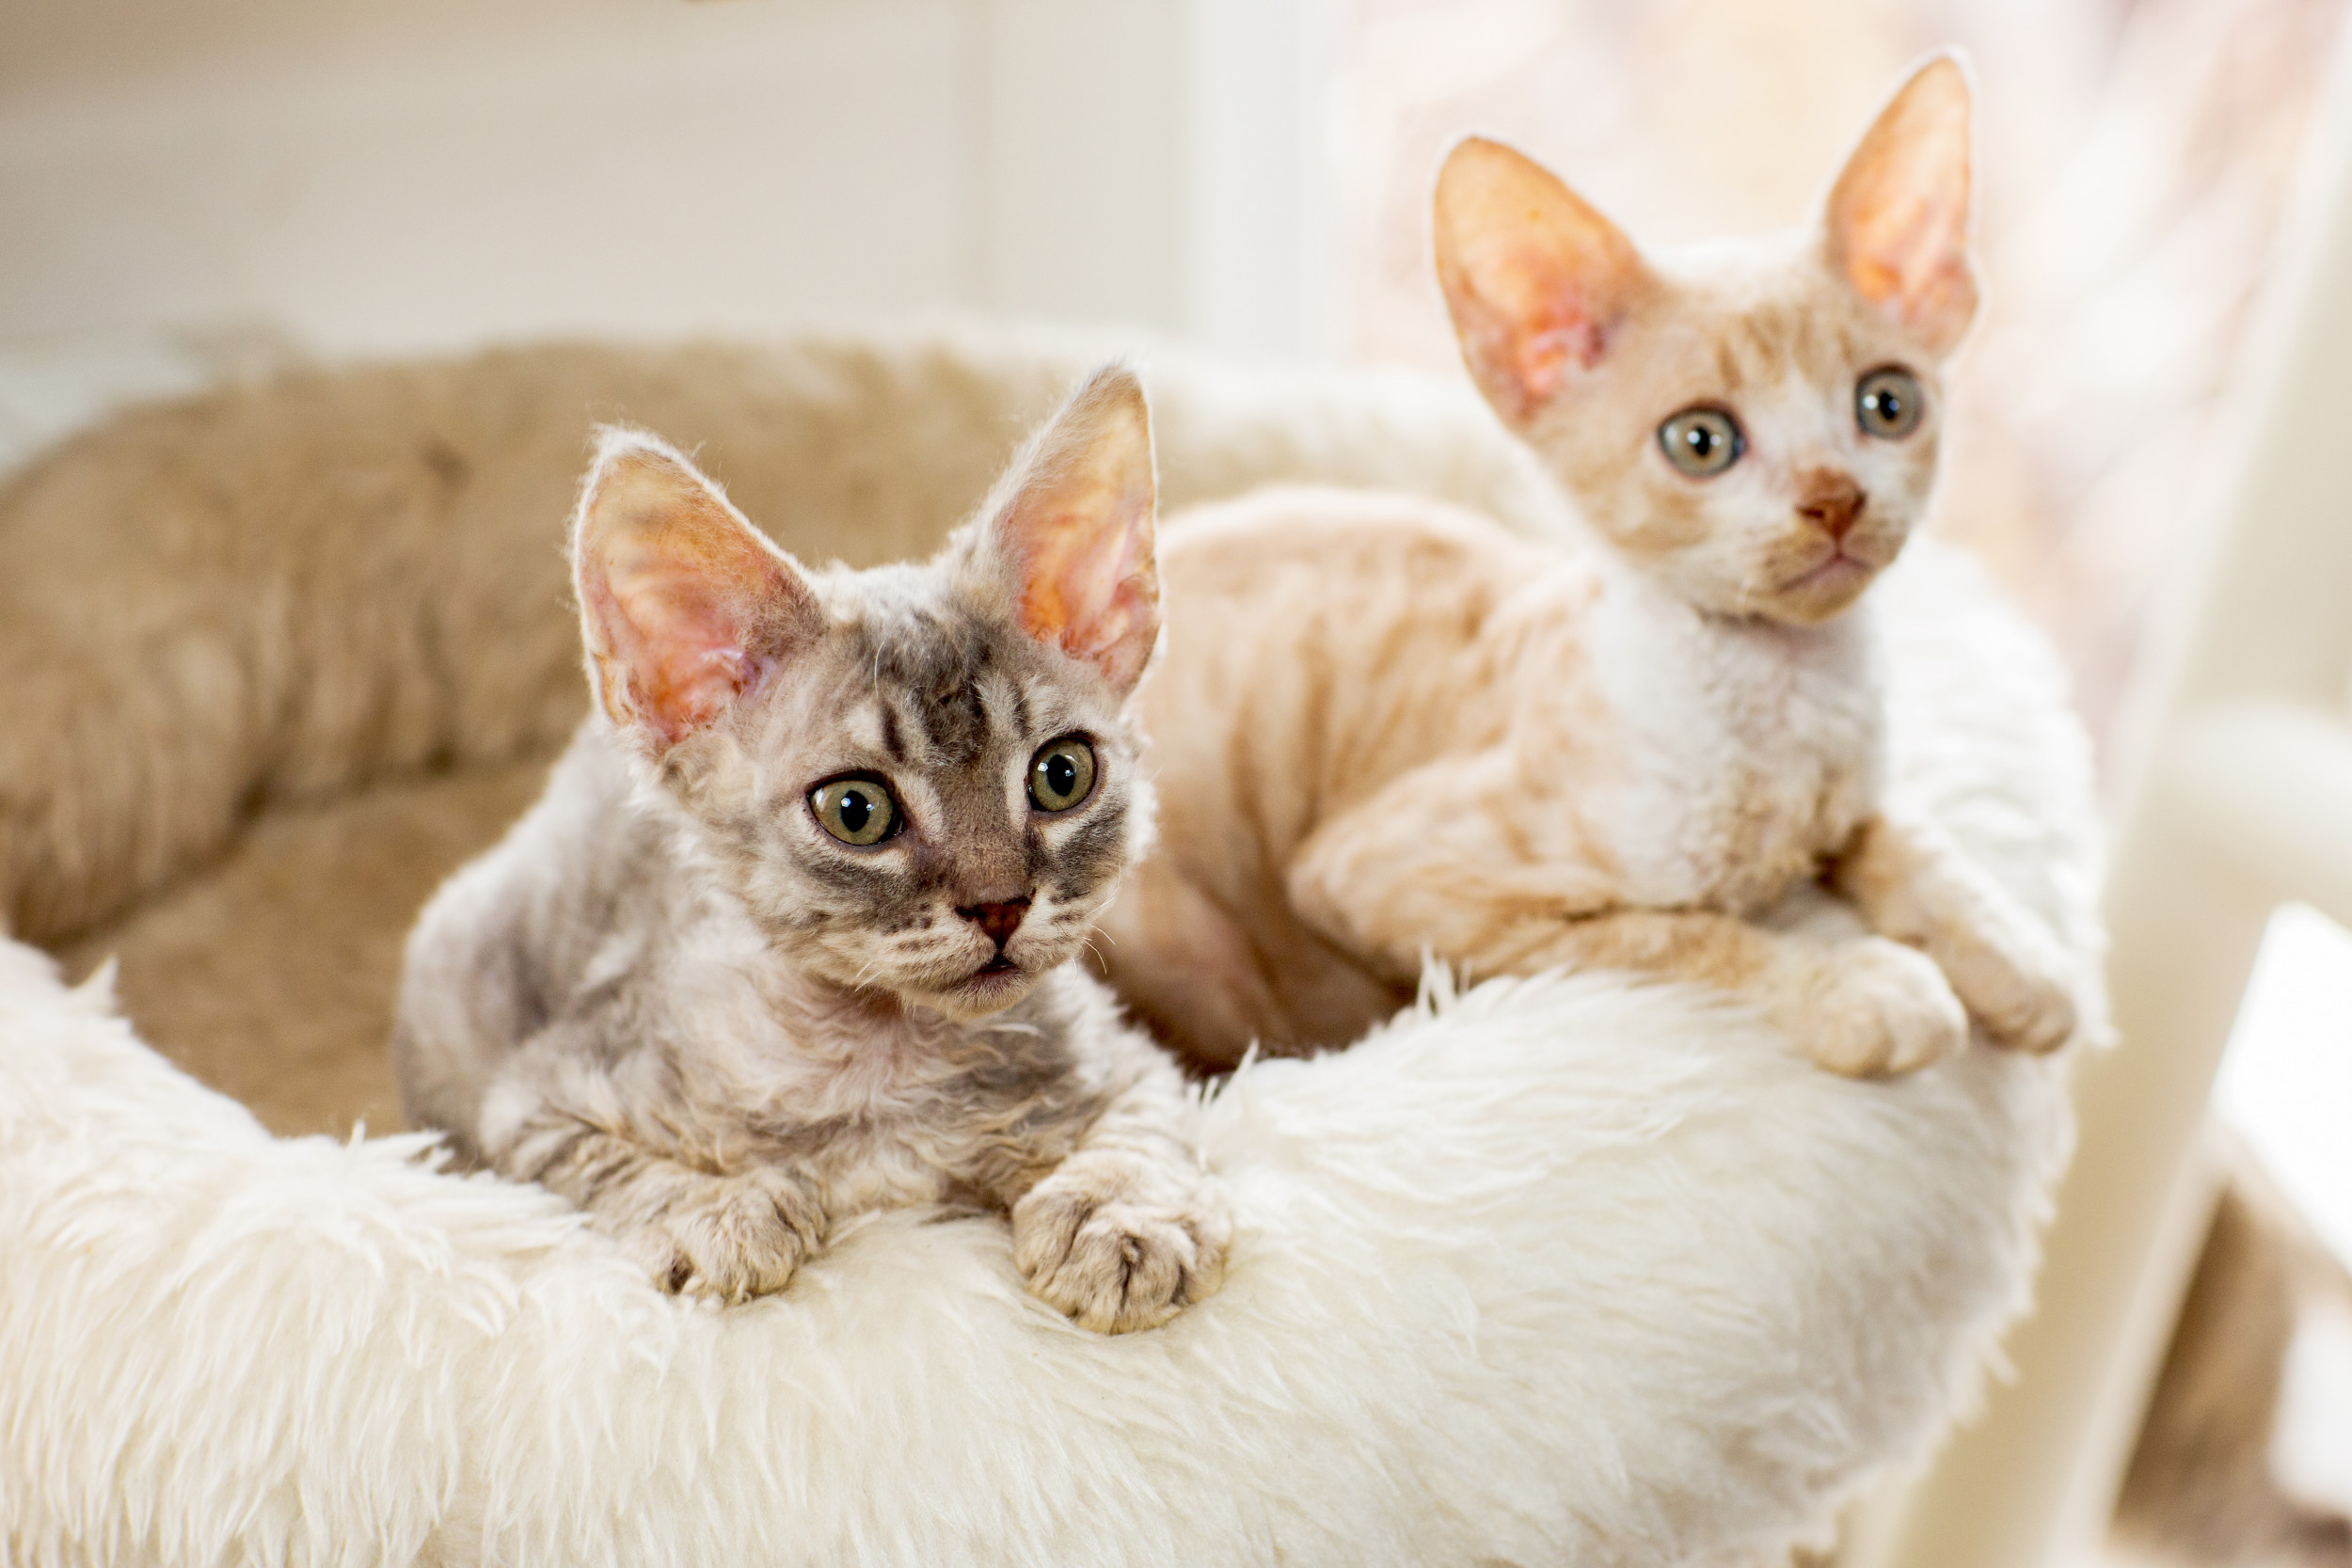 10 Hairless and Short-Haired Cat Breeds That Won't Leave Fur Everywhere